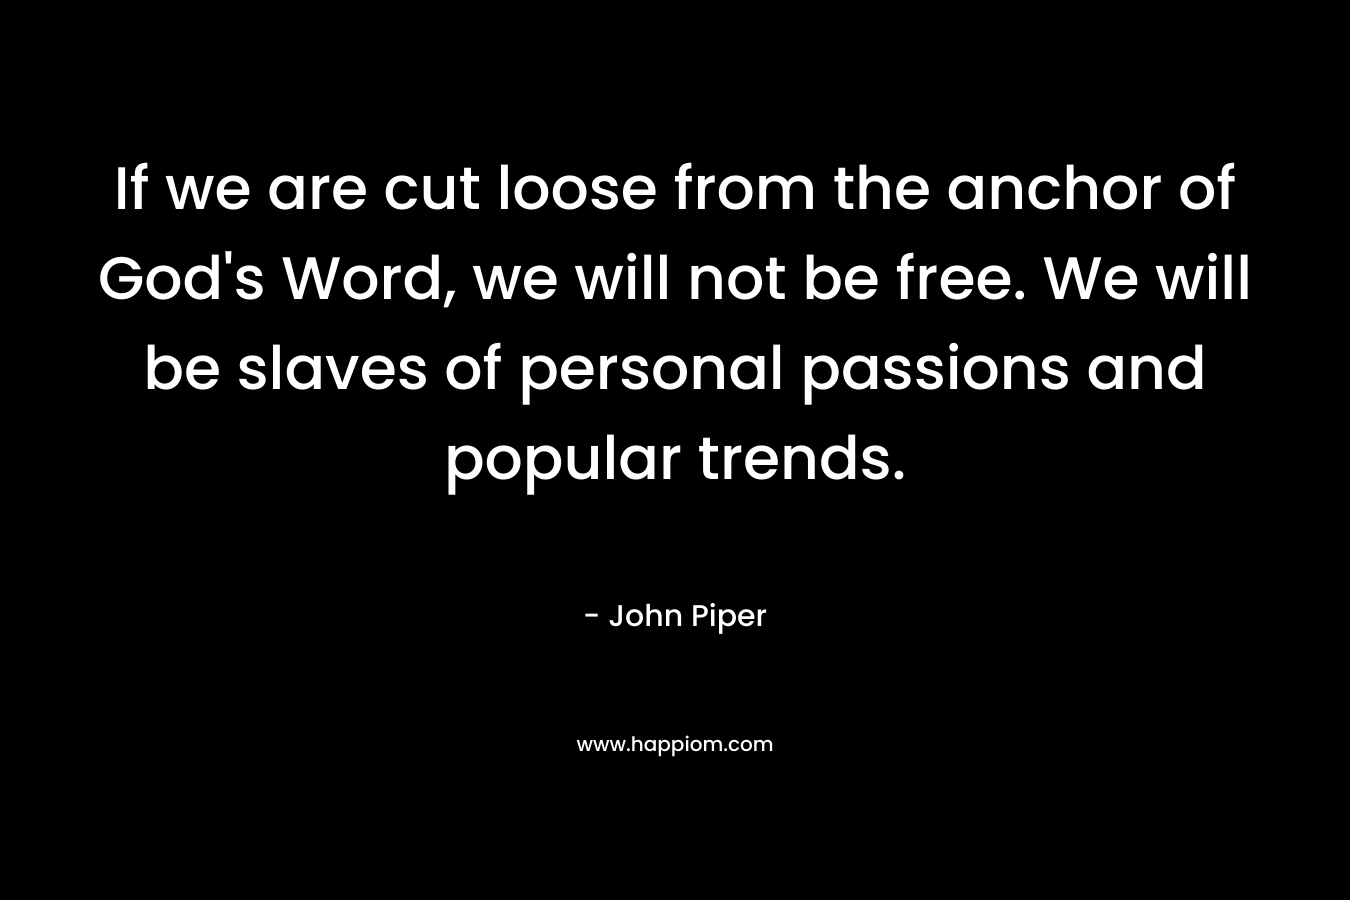 If we are cut loose from the anchor of God’s Word, we will not be free. We will be slaves of personal passions and popular trends. – John Piper